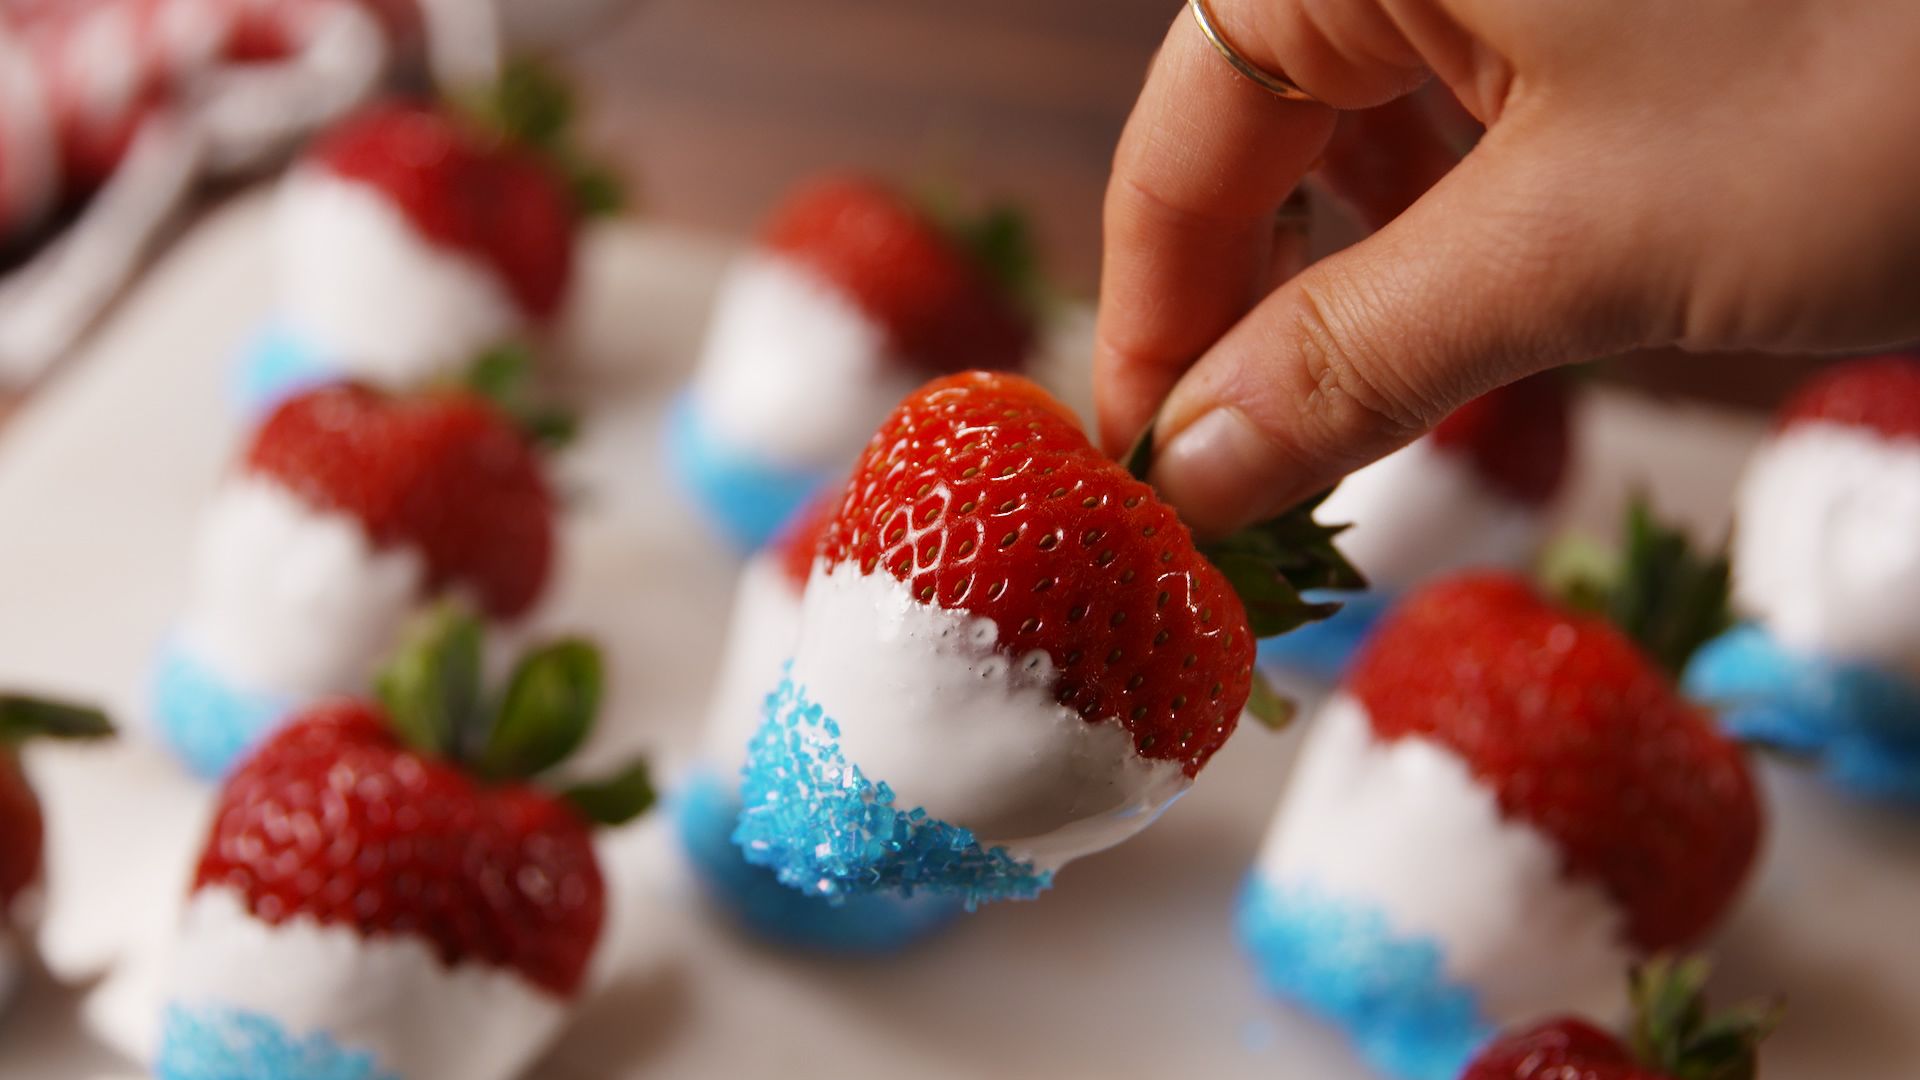 Firecracker strawberries for July 4th holiday